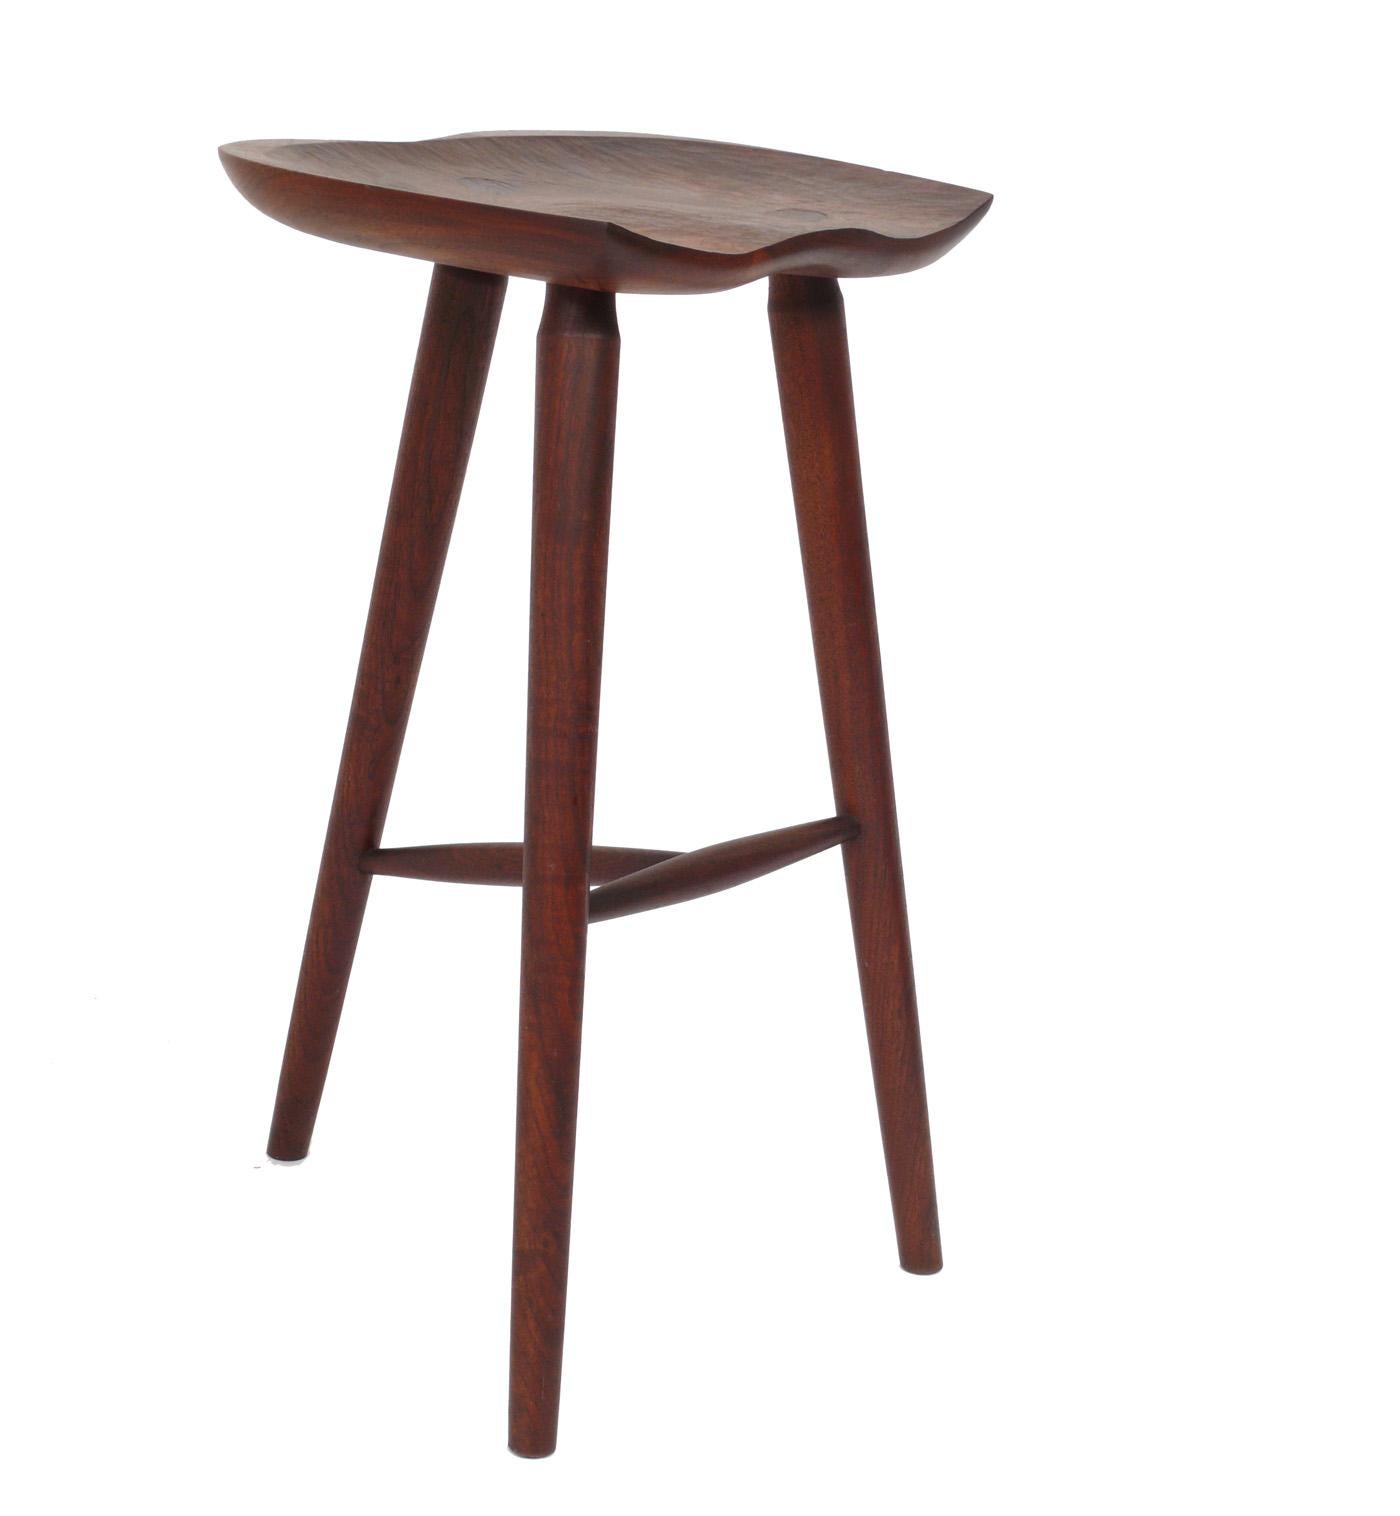 New Hope School vintage hand made bar stool, in the manner of George Nakashima, Philip Lloyd Powell, et al, American, circa 1970s. We only have the one stool, and believe it to be unique. Retains warm original patina.